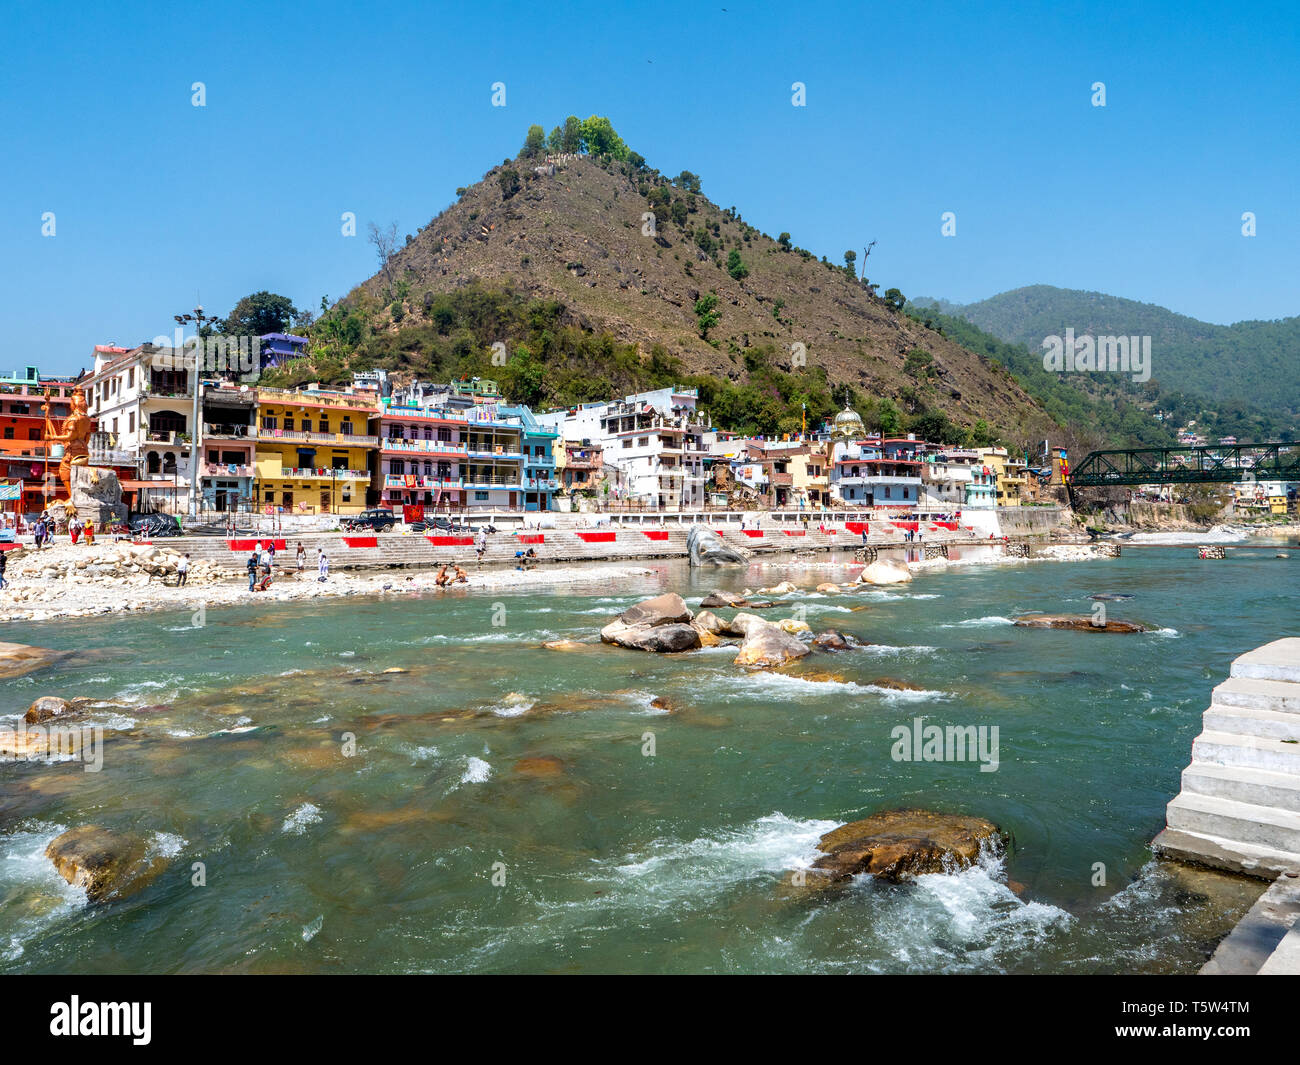 The city of Bageshwar in the Uttarakhand state of Northern India at the confluence of the Saryu and Gomati rivers Stock Photo